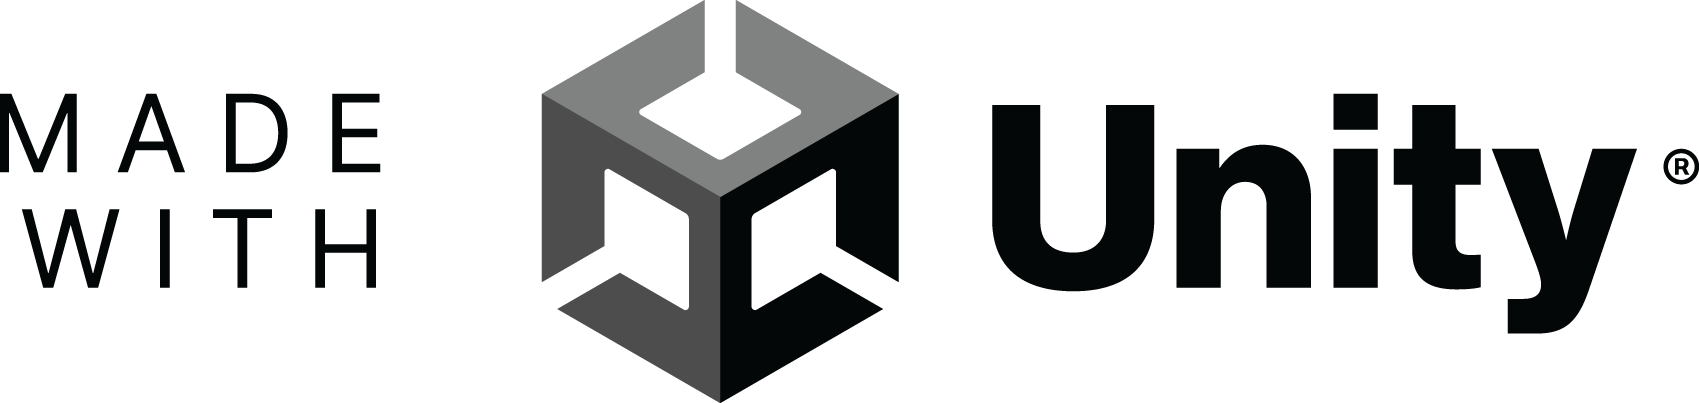 Made with unity logo with updated cube